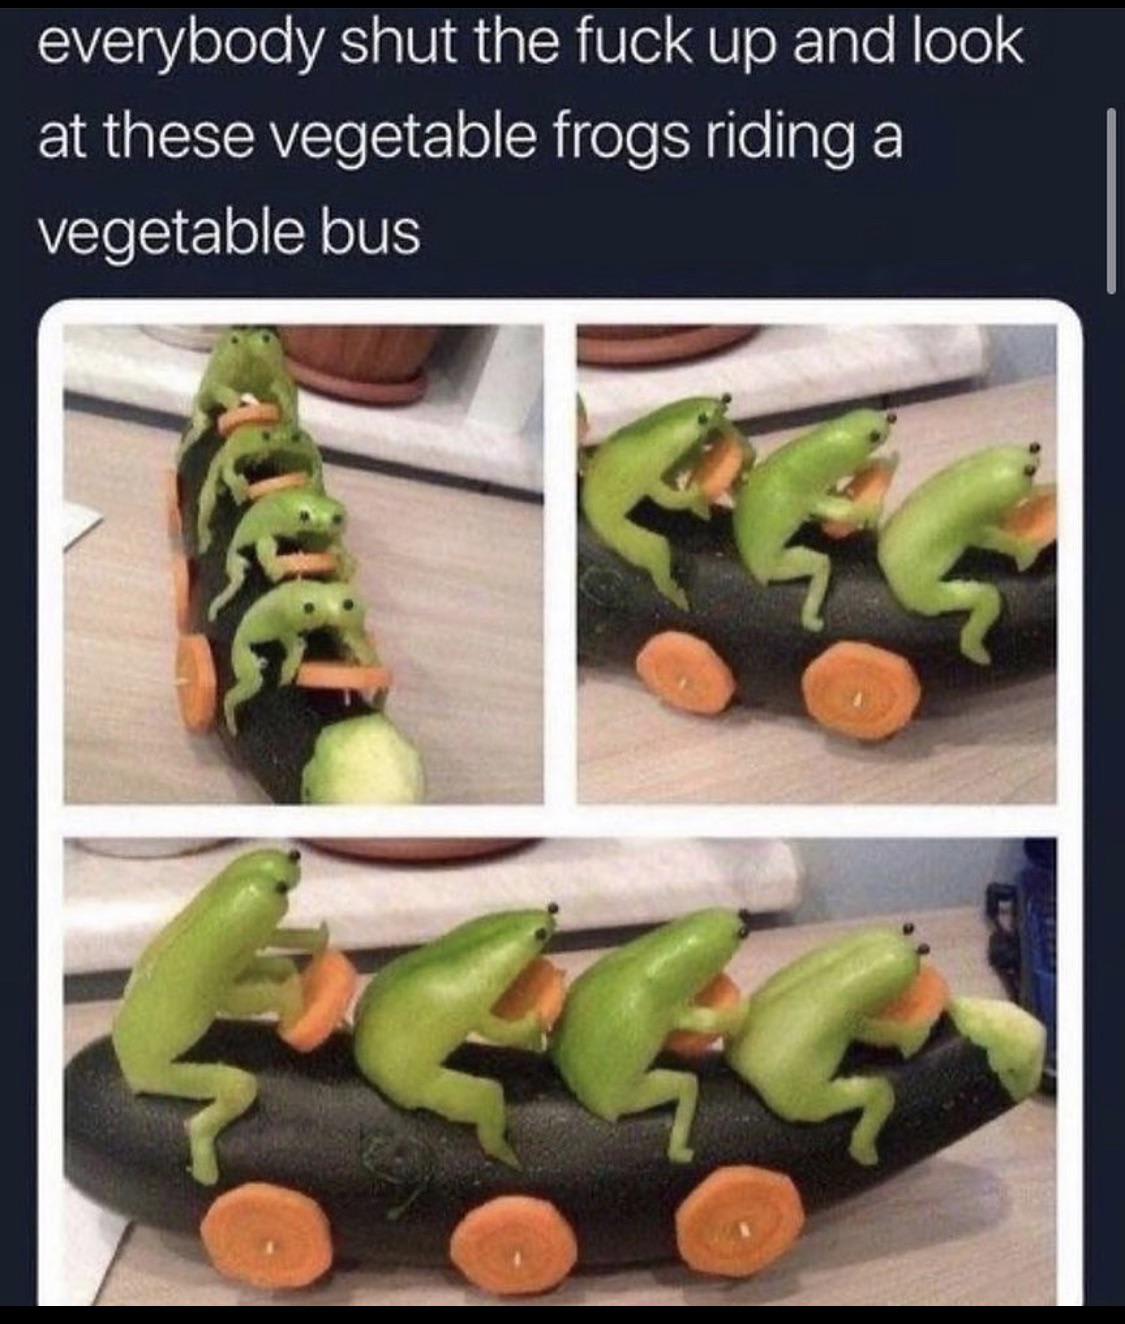 Vegetable frogs riding a vegetable bus